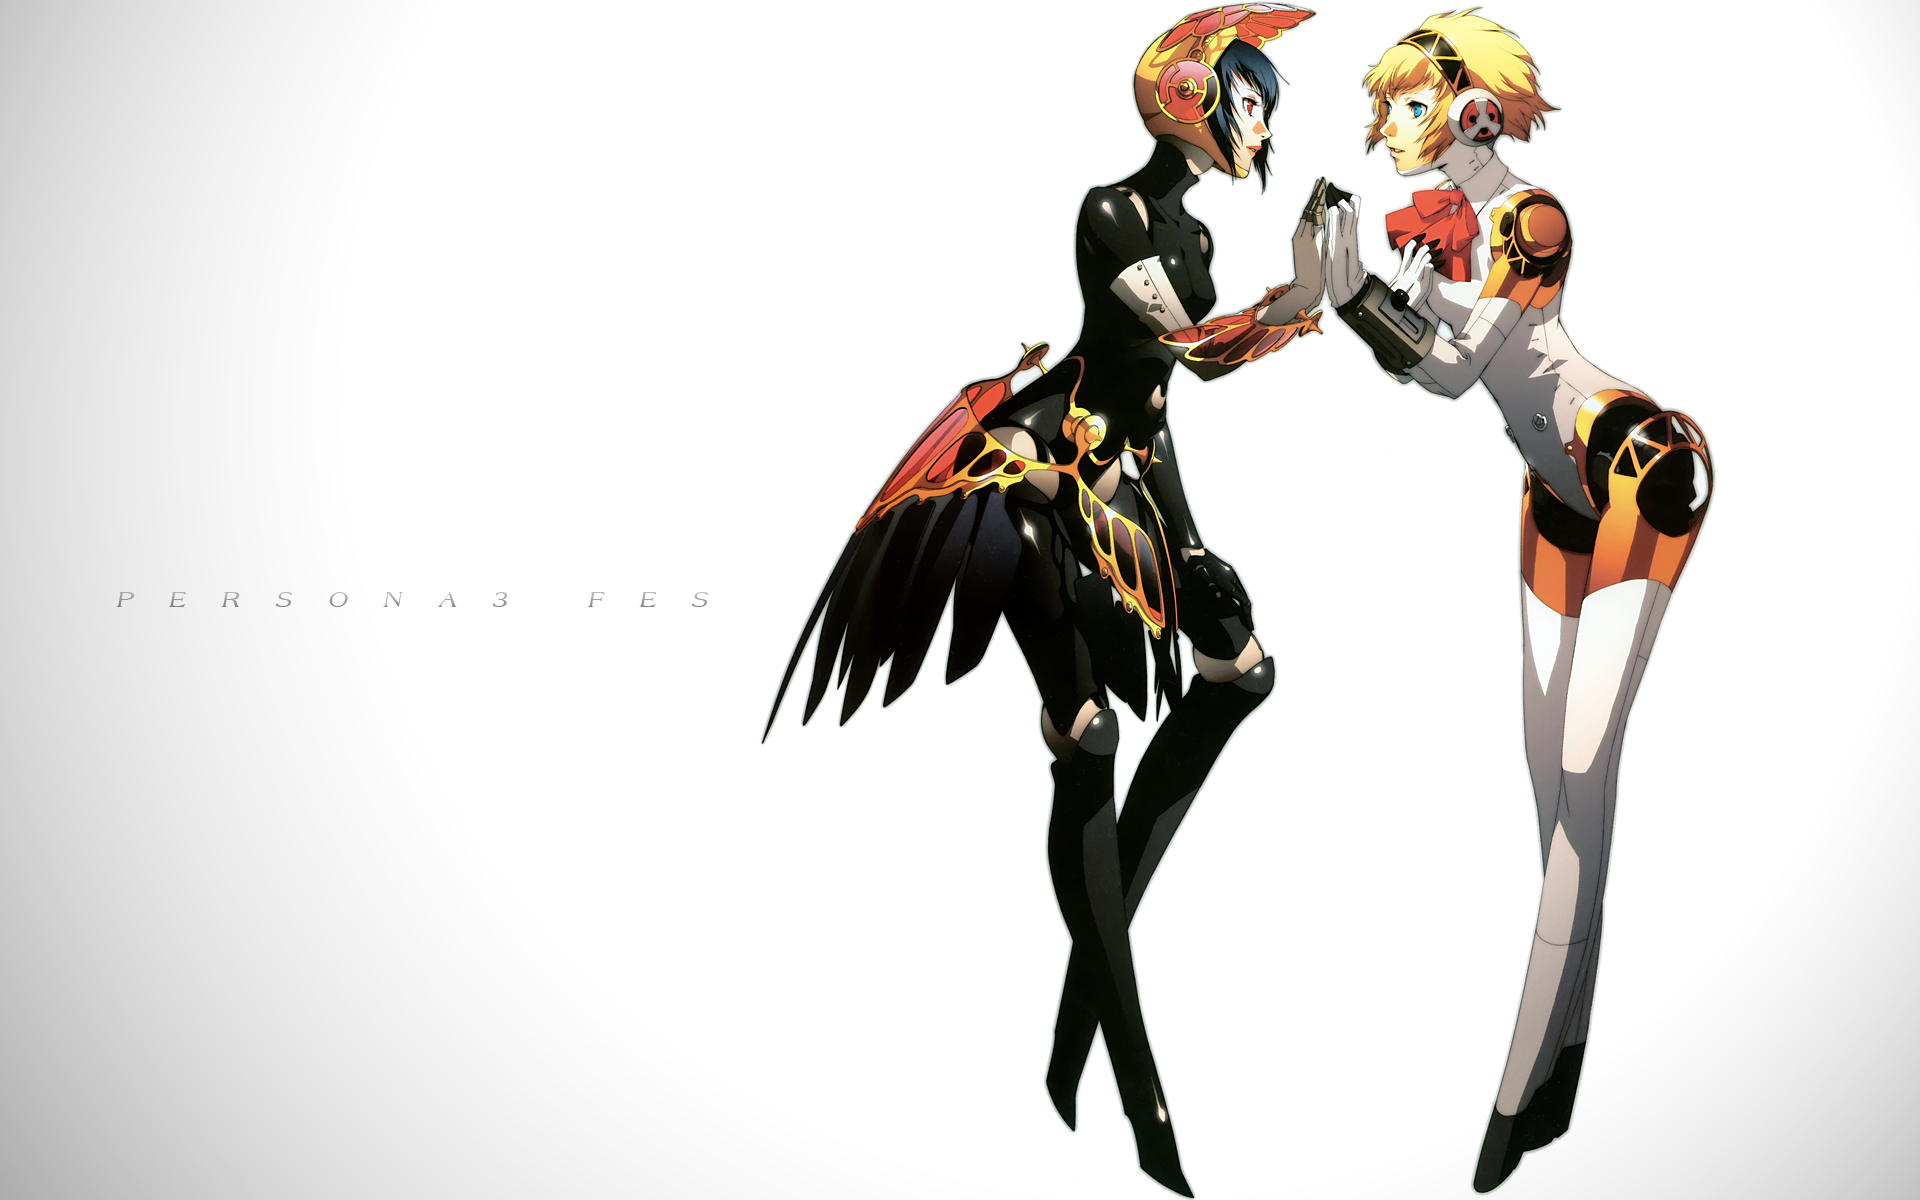 Persona 3 Fes Widescreen Patch Download